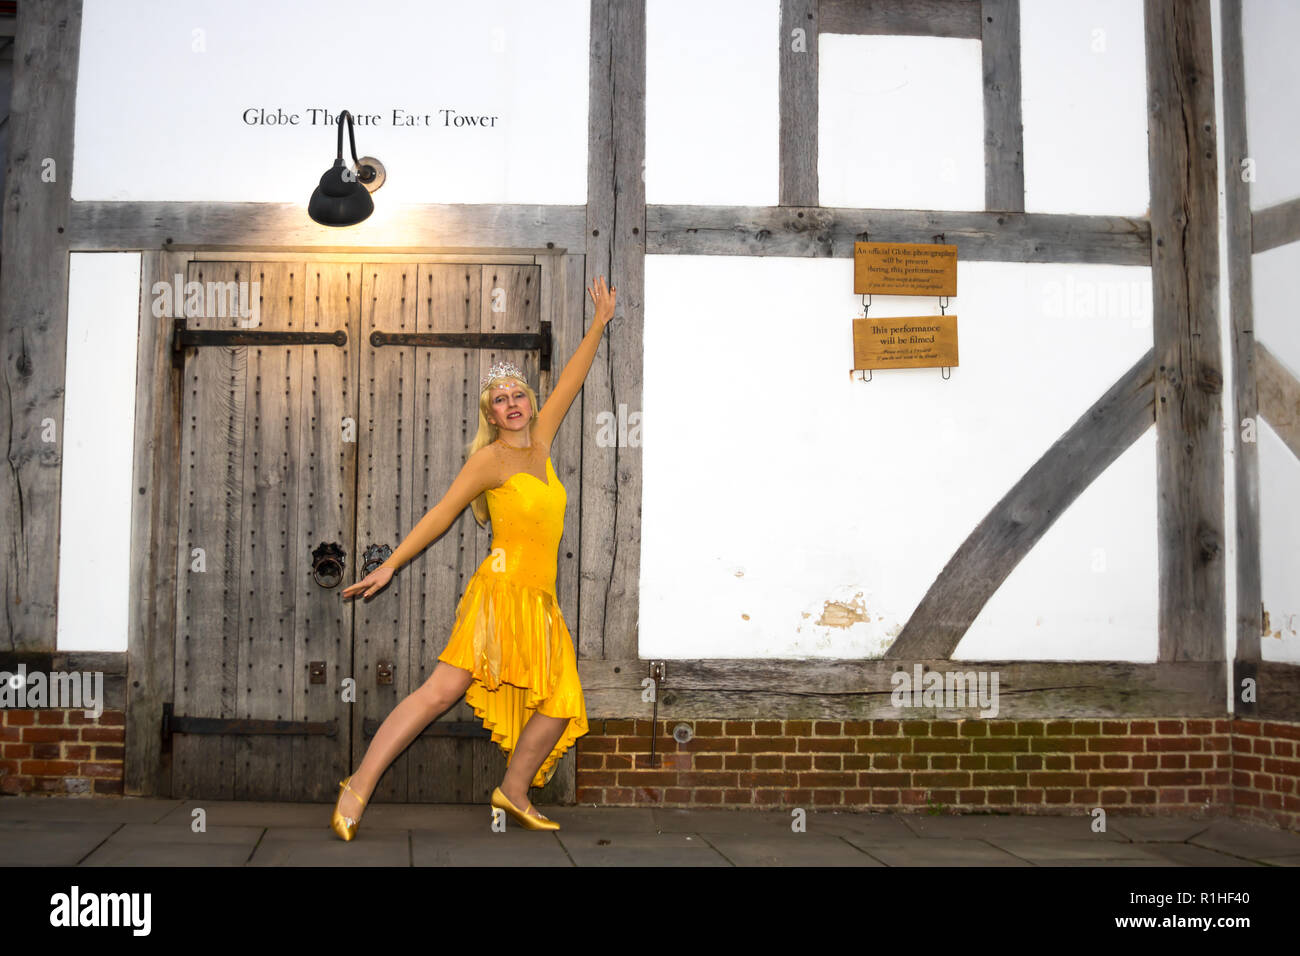 Actress, singer and dancer Melody Burke pictured at the Globe theatre in London wearing her dance outfit before a performance. Stock Photo